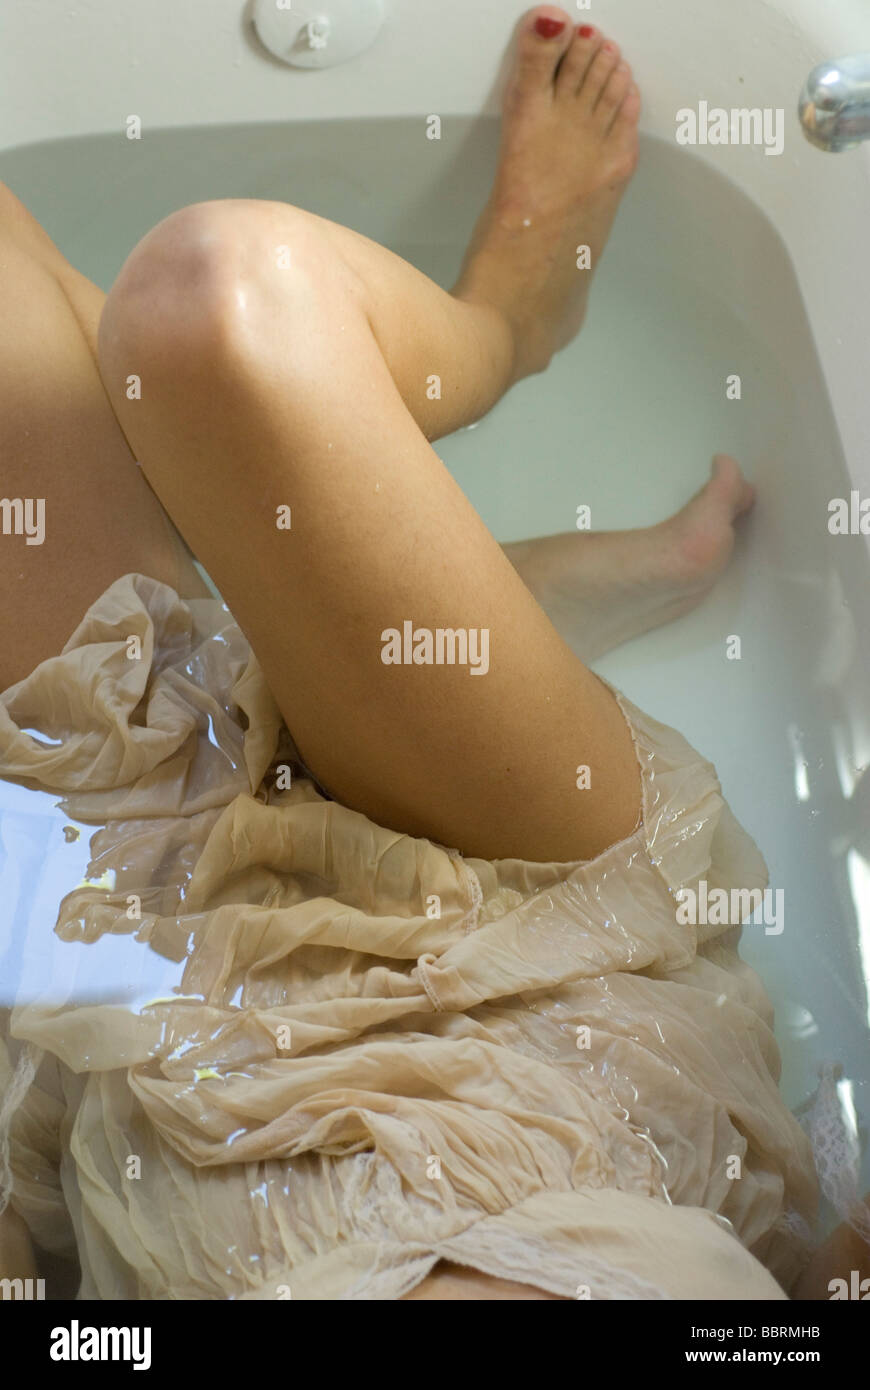 woman in the bath. Dress and details of body floating in the water Stock Photo